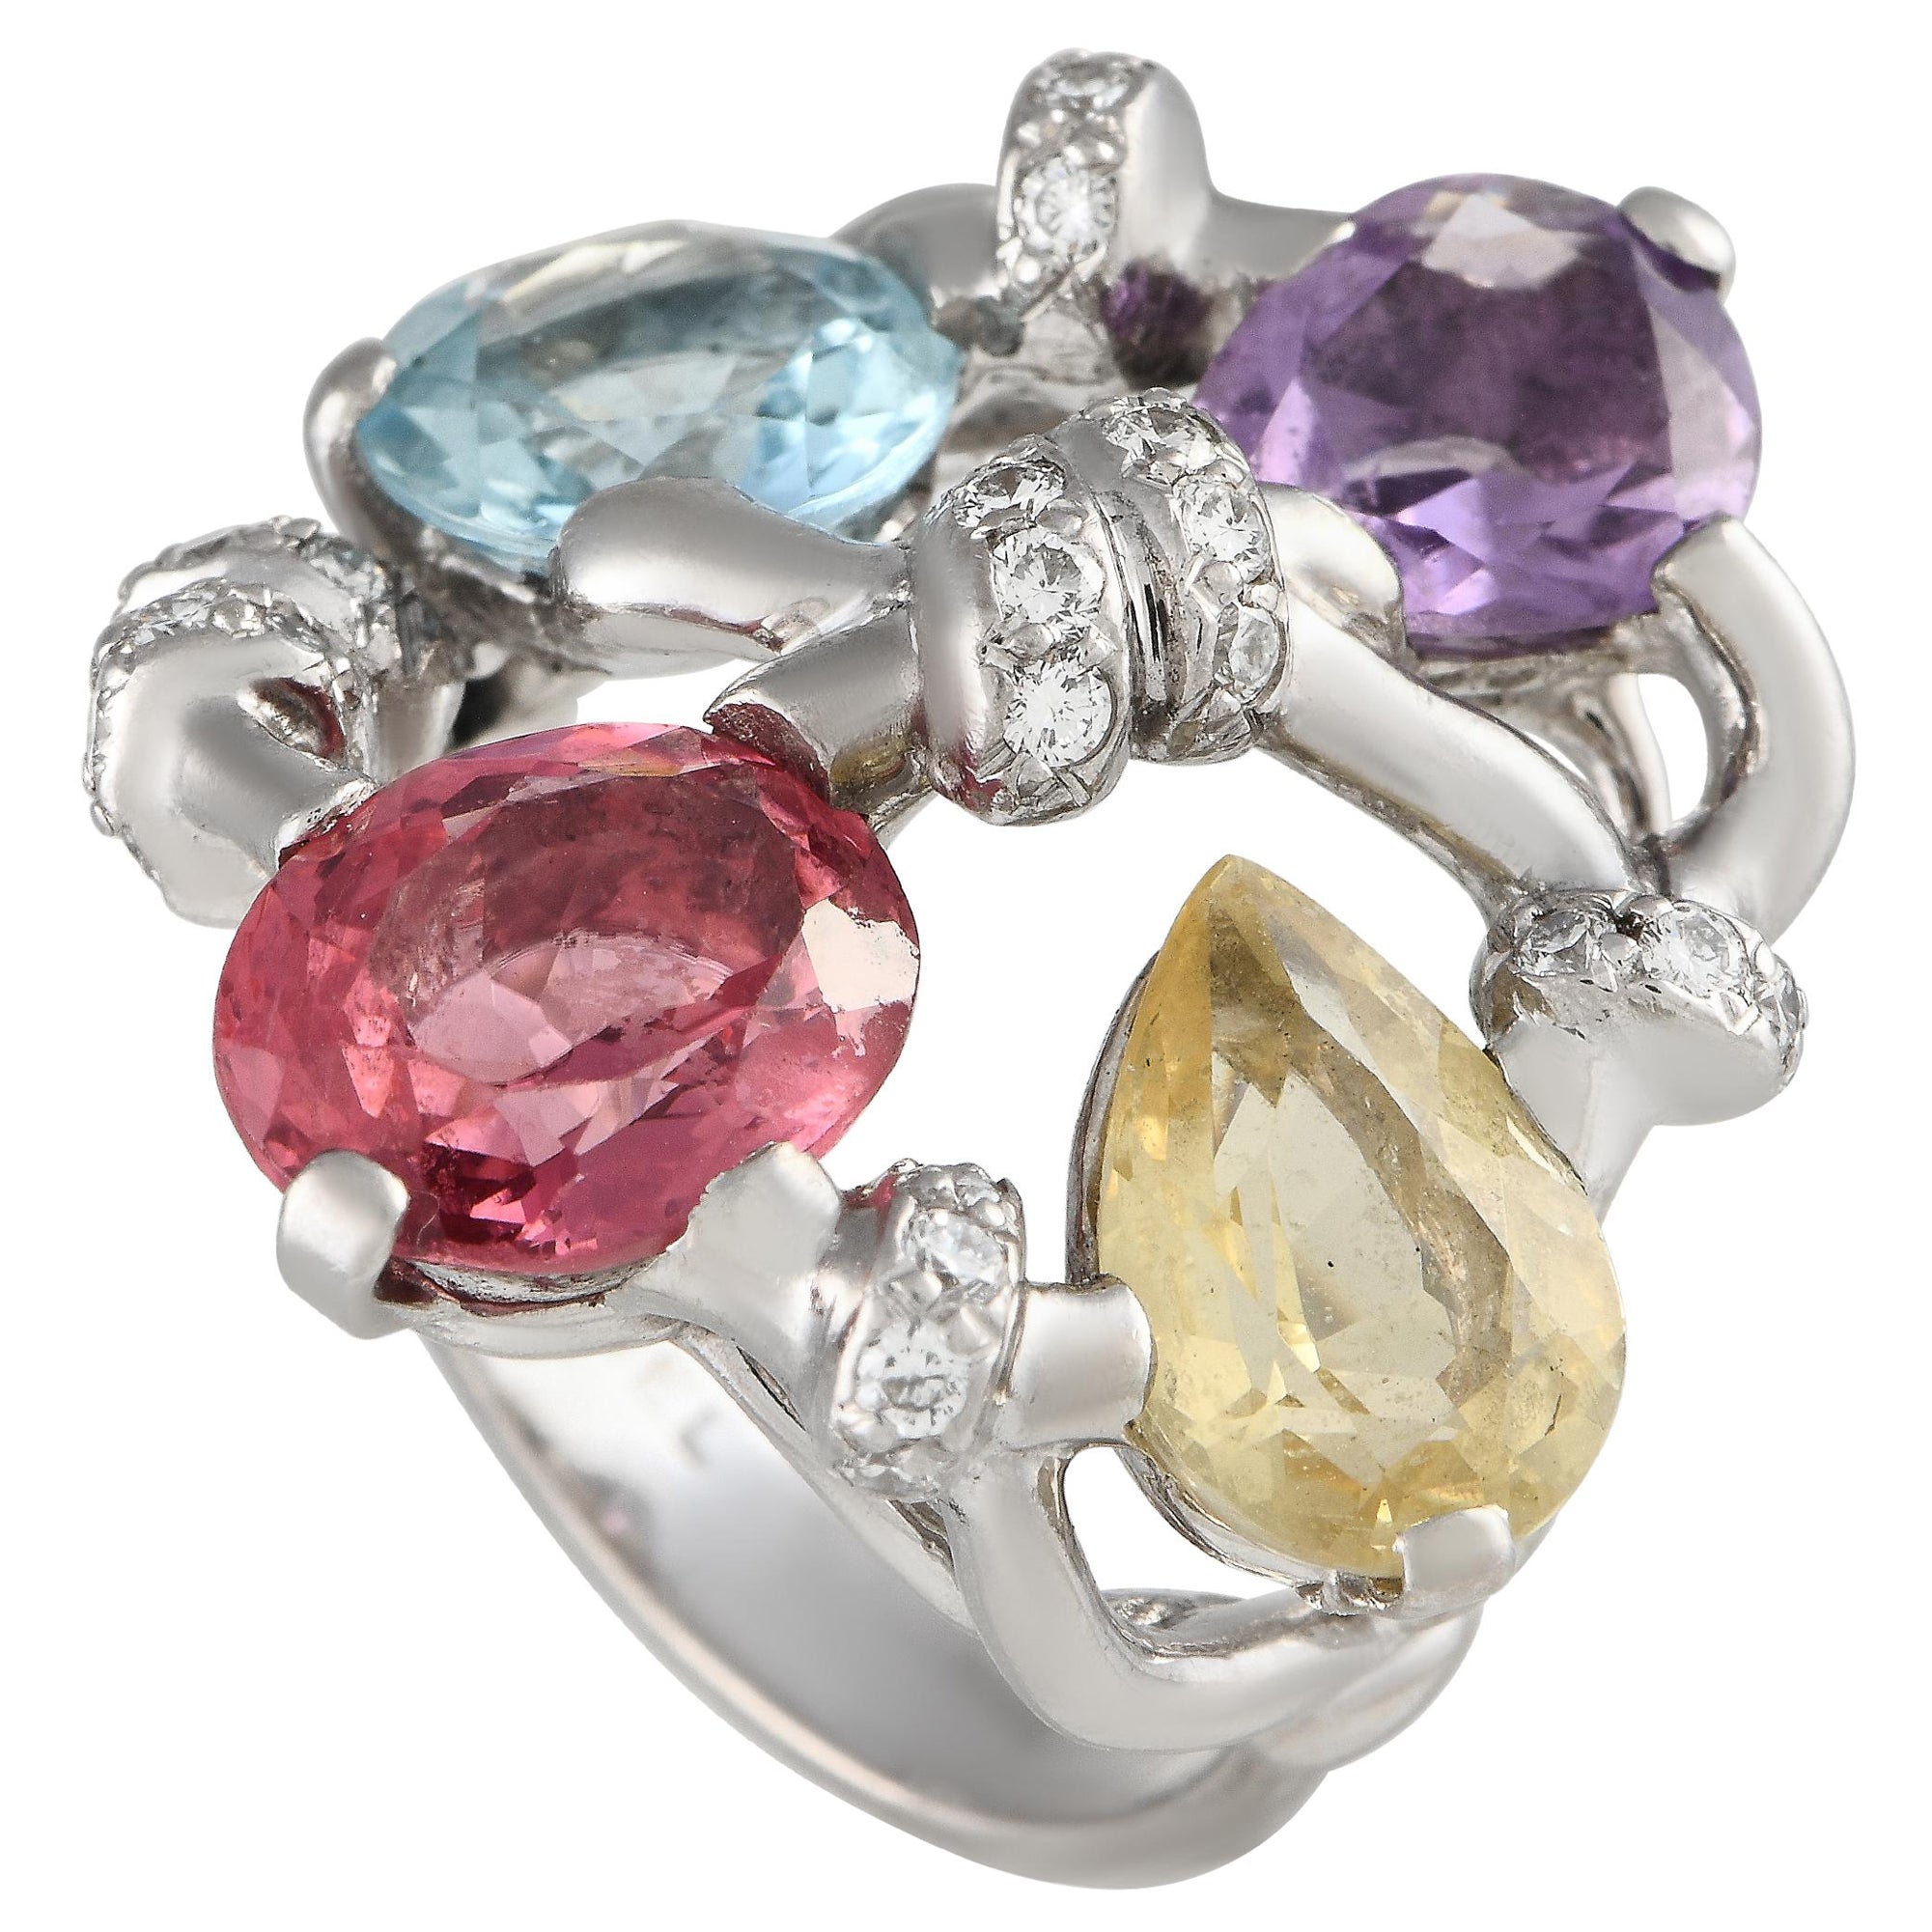 Chanel 18k White Gold Diamond and Multicolored Gemstone Ring